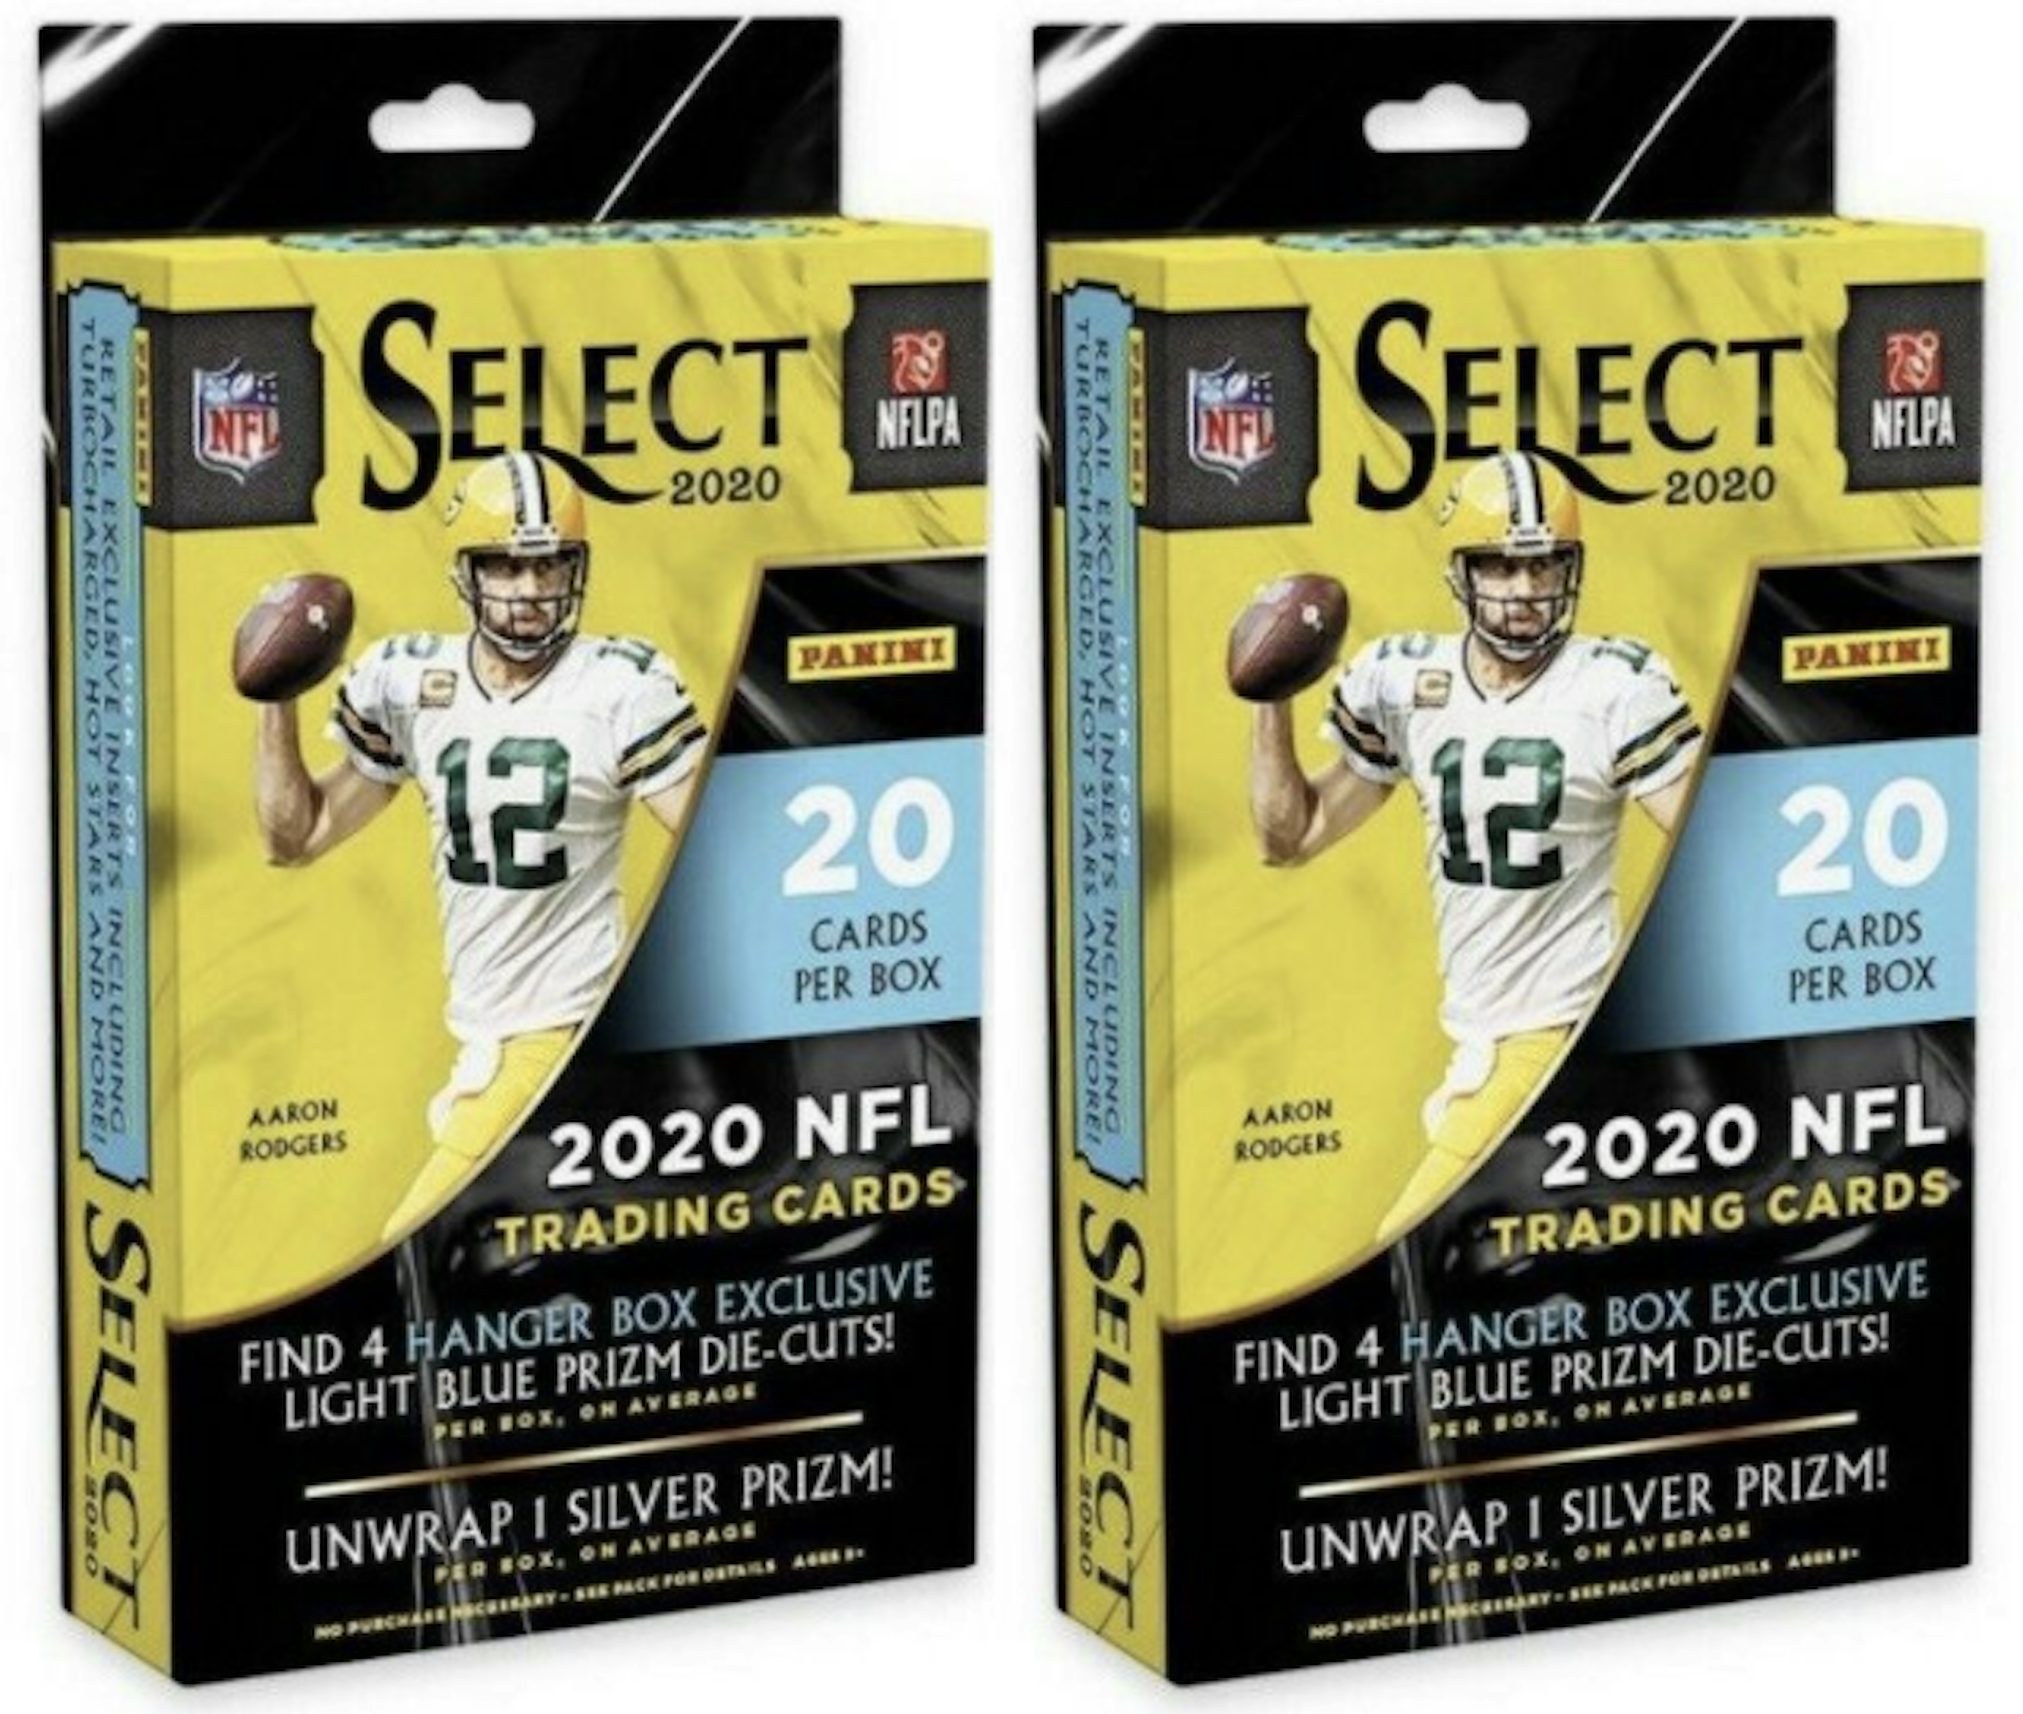 18 cartes à collectionner exclusives Panini NFL Football Hanger Box 